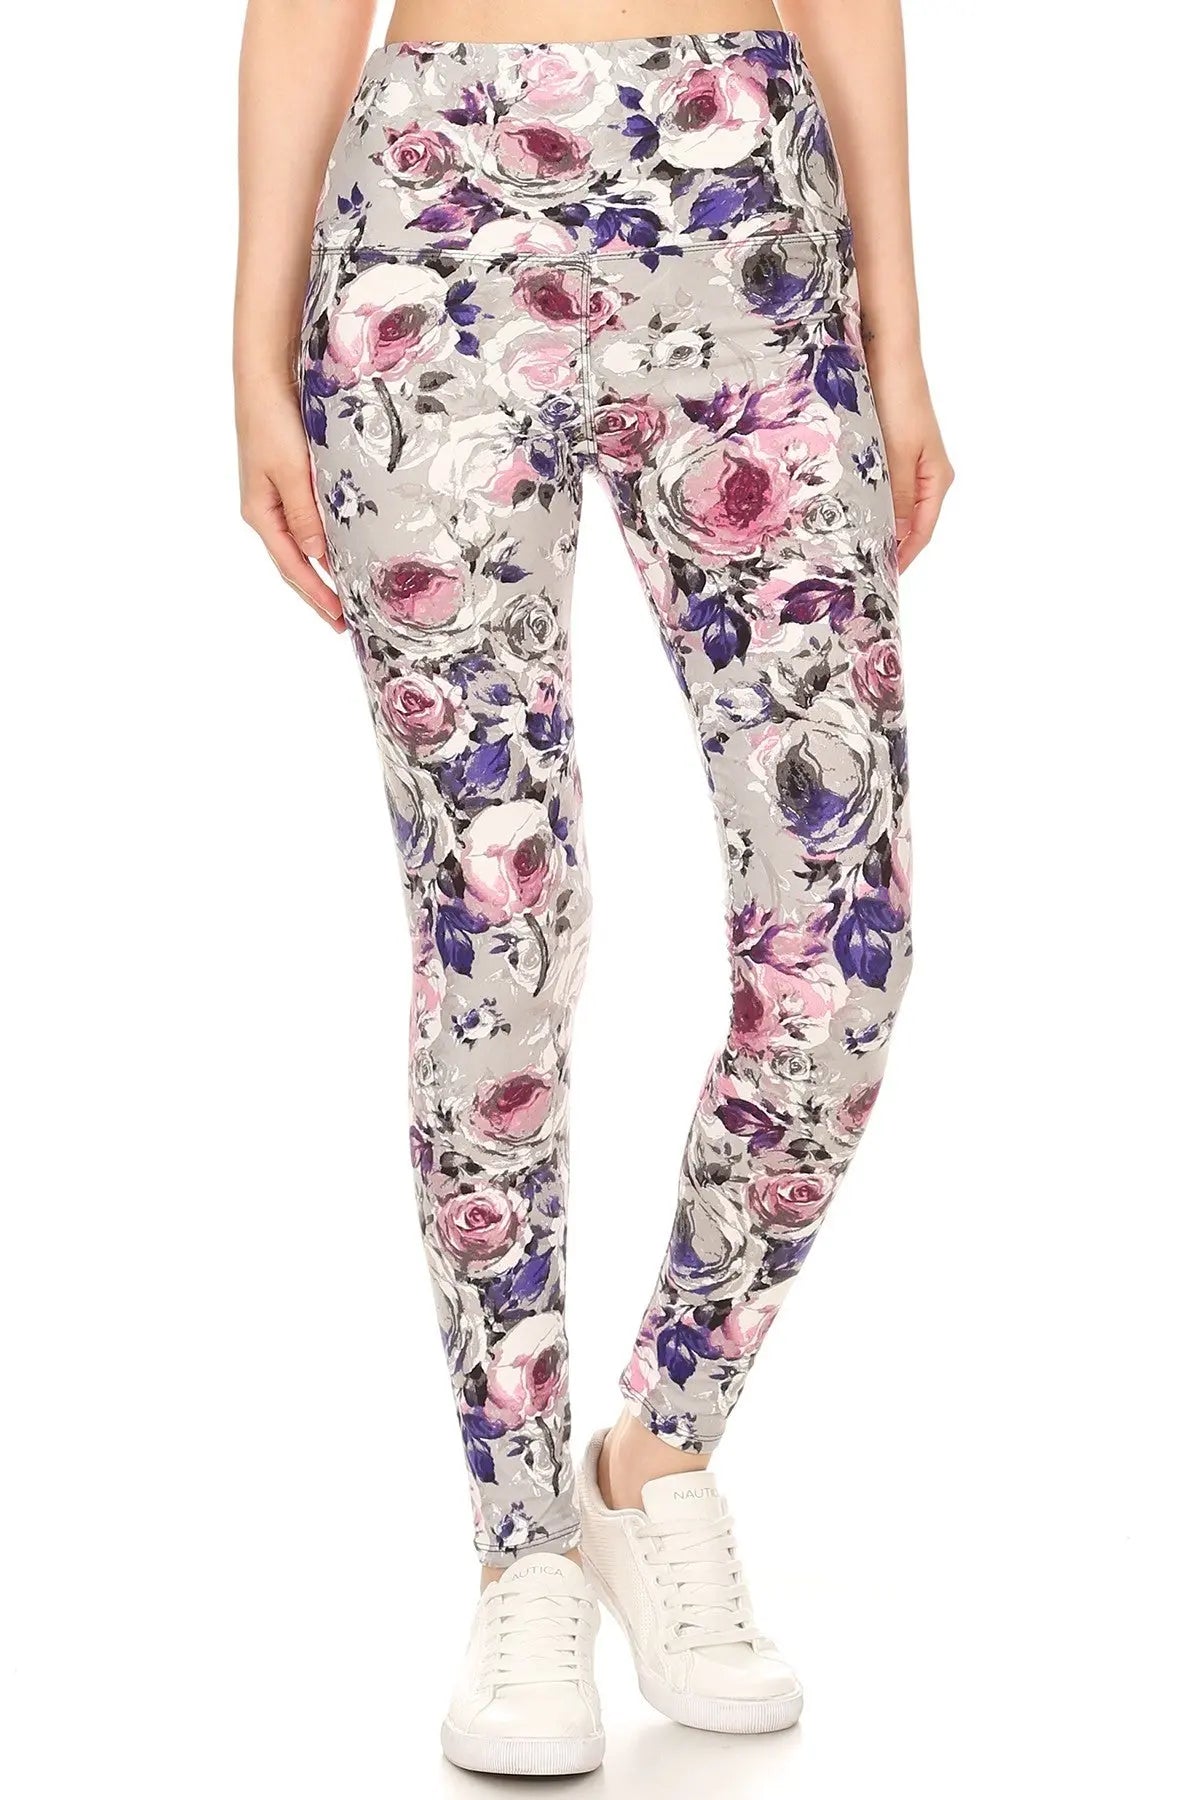 5-inch Long Yoga Style Banded Lined Floral Printed Knit Legging With High Waist Sunny EvE Fashion